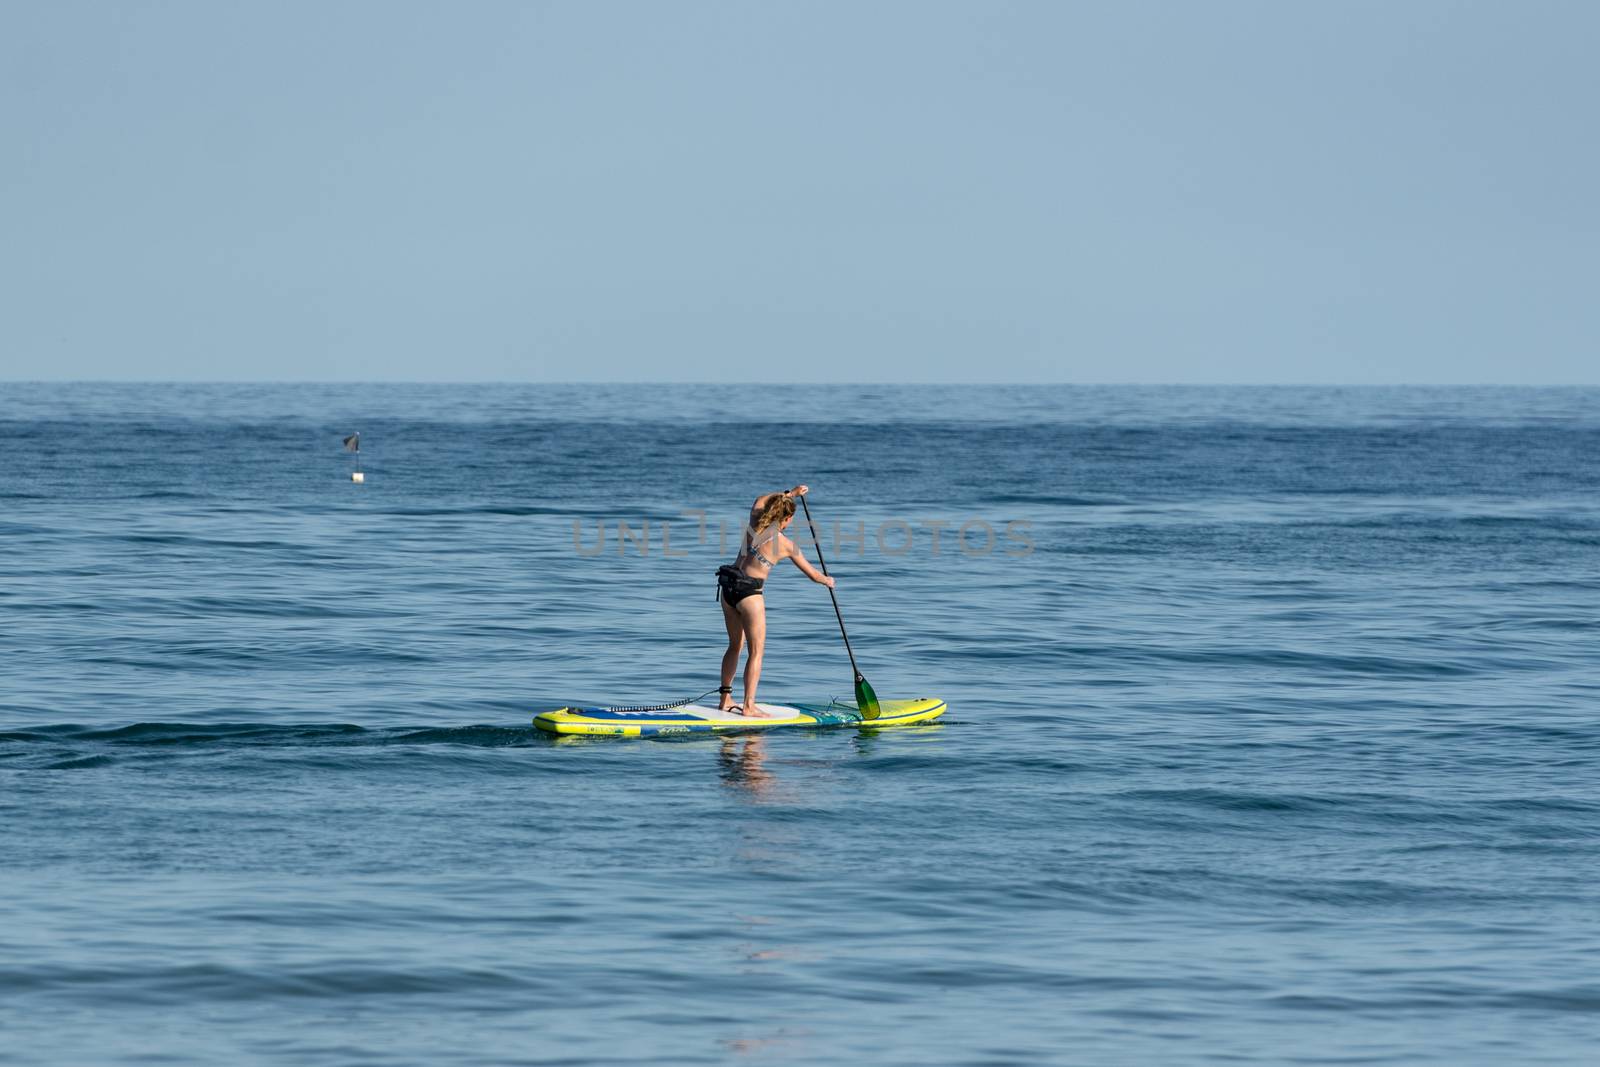 Castelldefels, Spain: 2020 June 25: People ride in Paddle Surf on the coast of Castelldefels in Barcelona in summer after COVID 19 on June 2020.